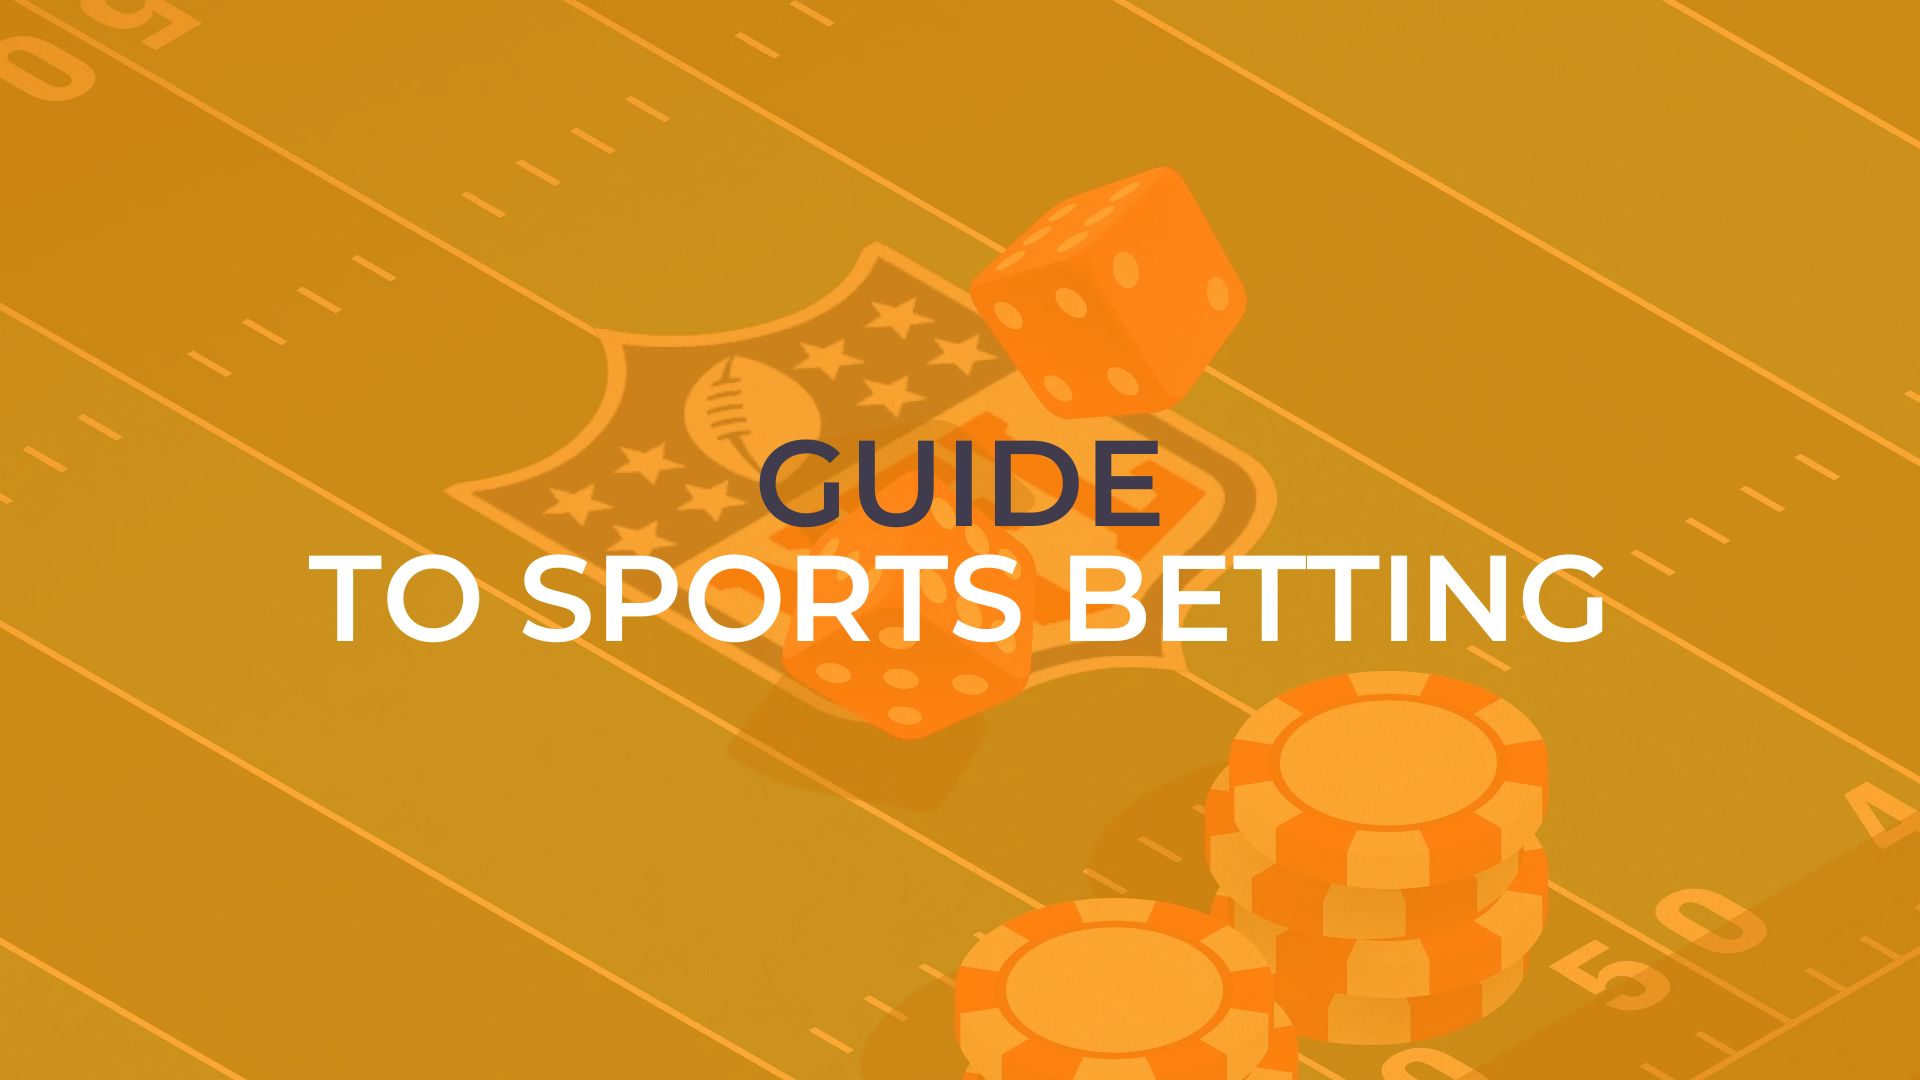 A Beginner's Guide to Sports Betting